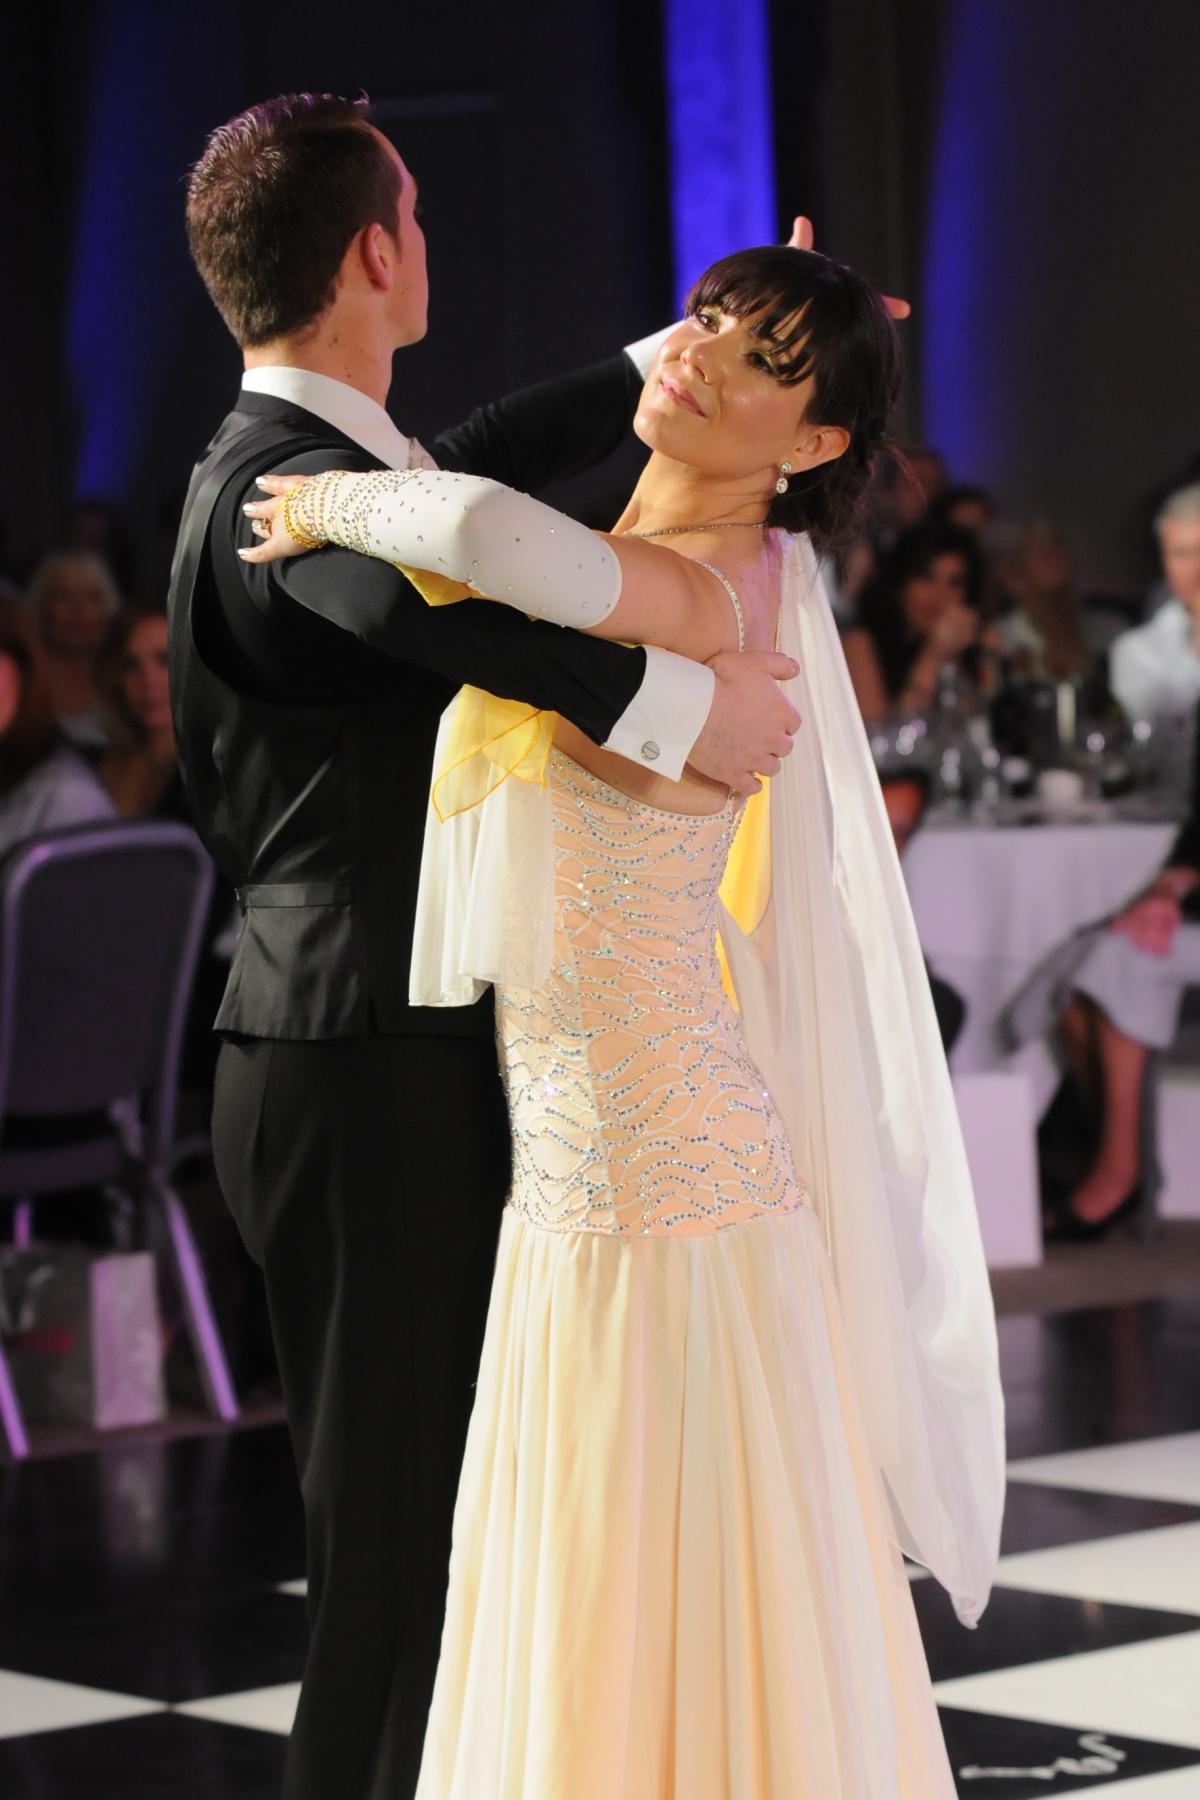 Vicki Stockman takes to the floor for her Viennese waltz